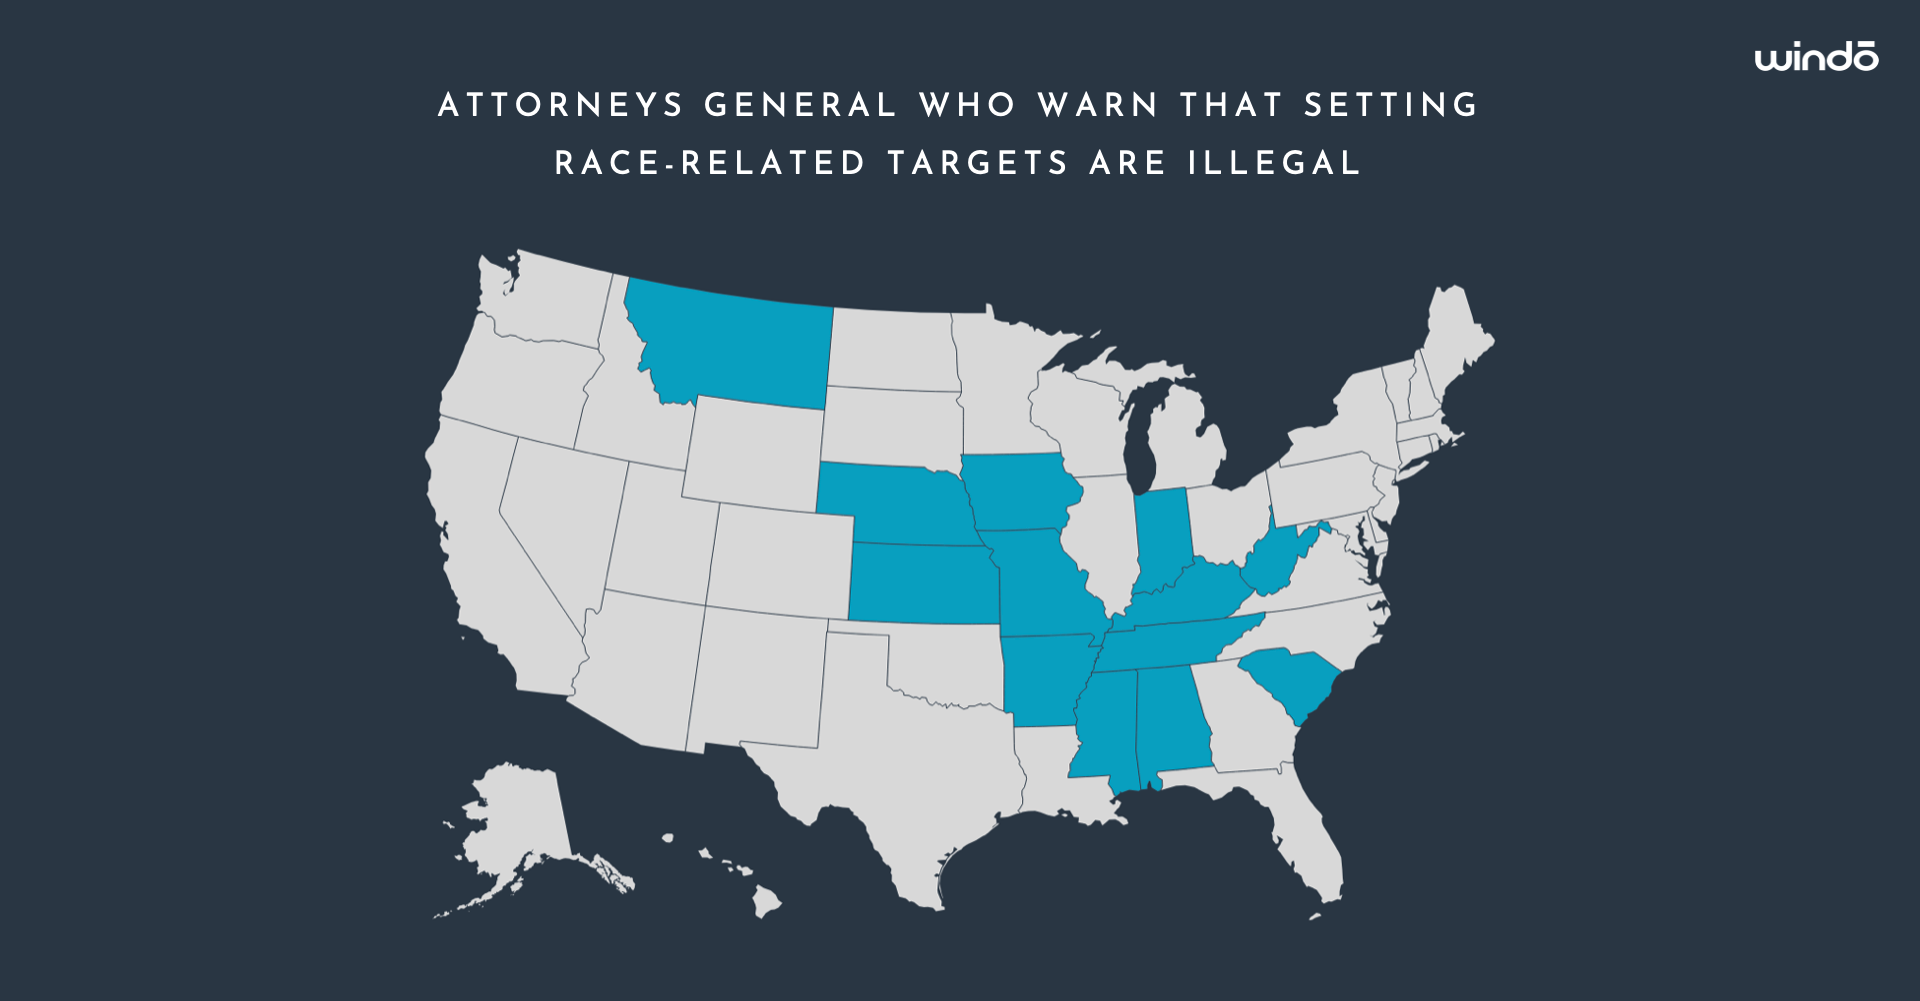 Windo_Attorneys_general_race-related_targets